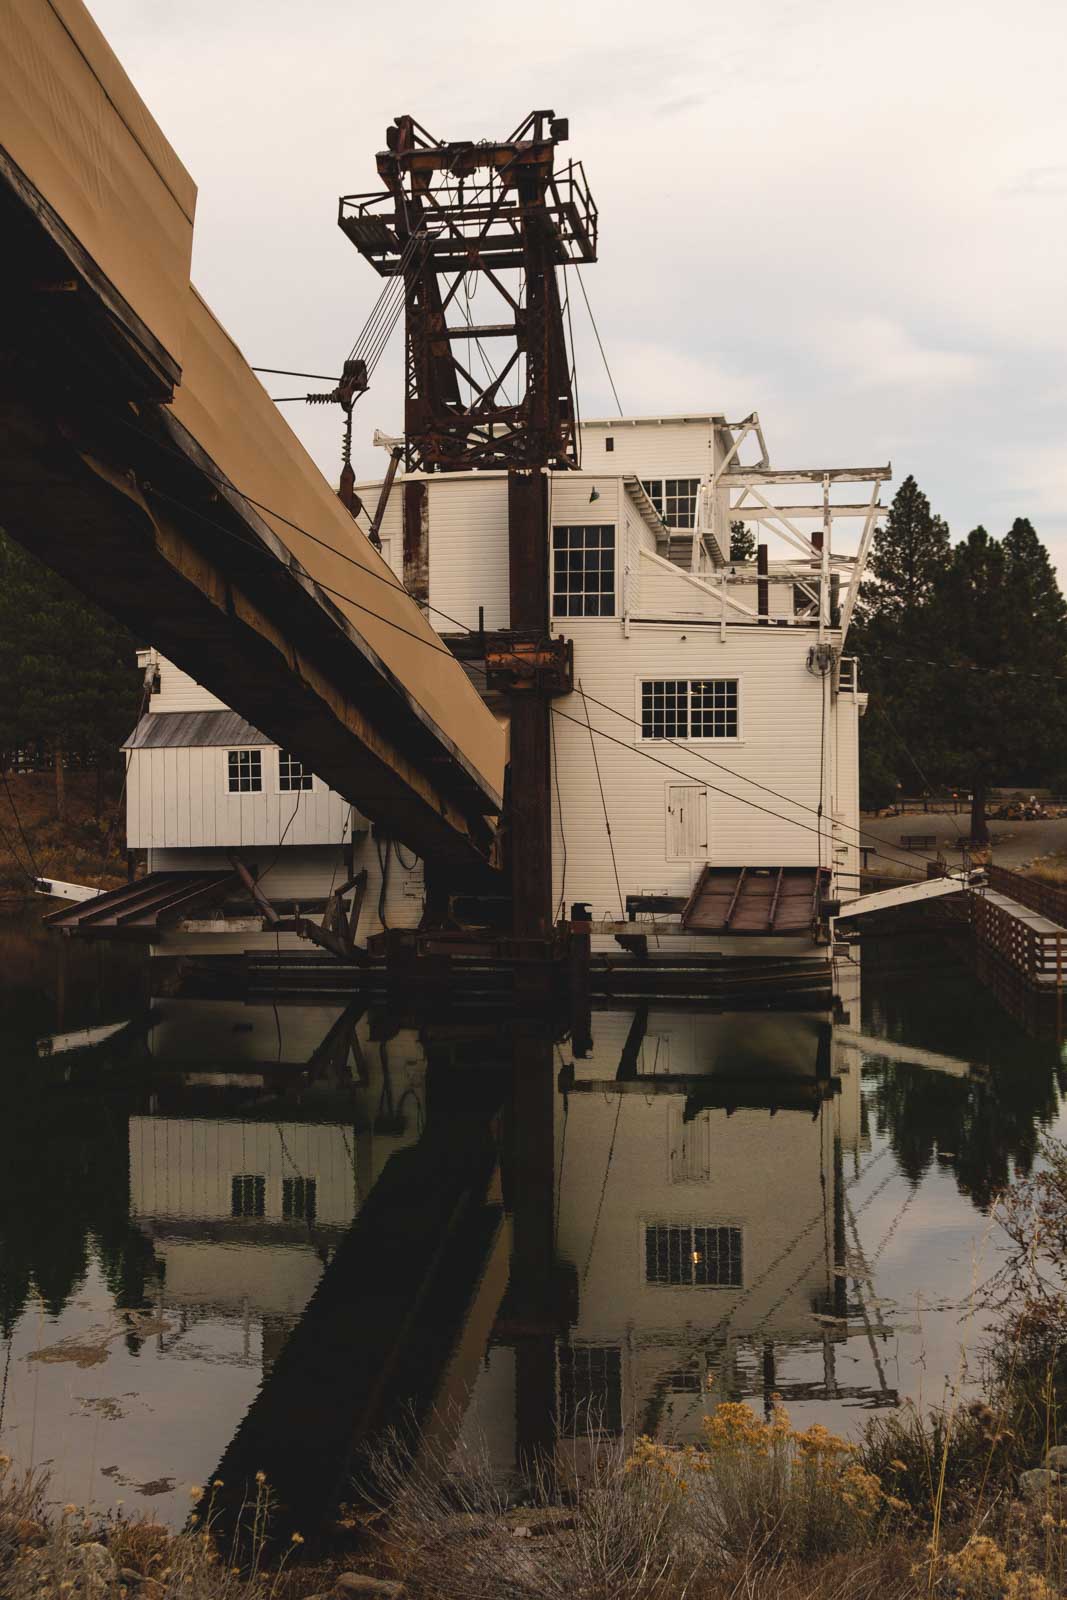 Sumpter Valley Dredge during a trip